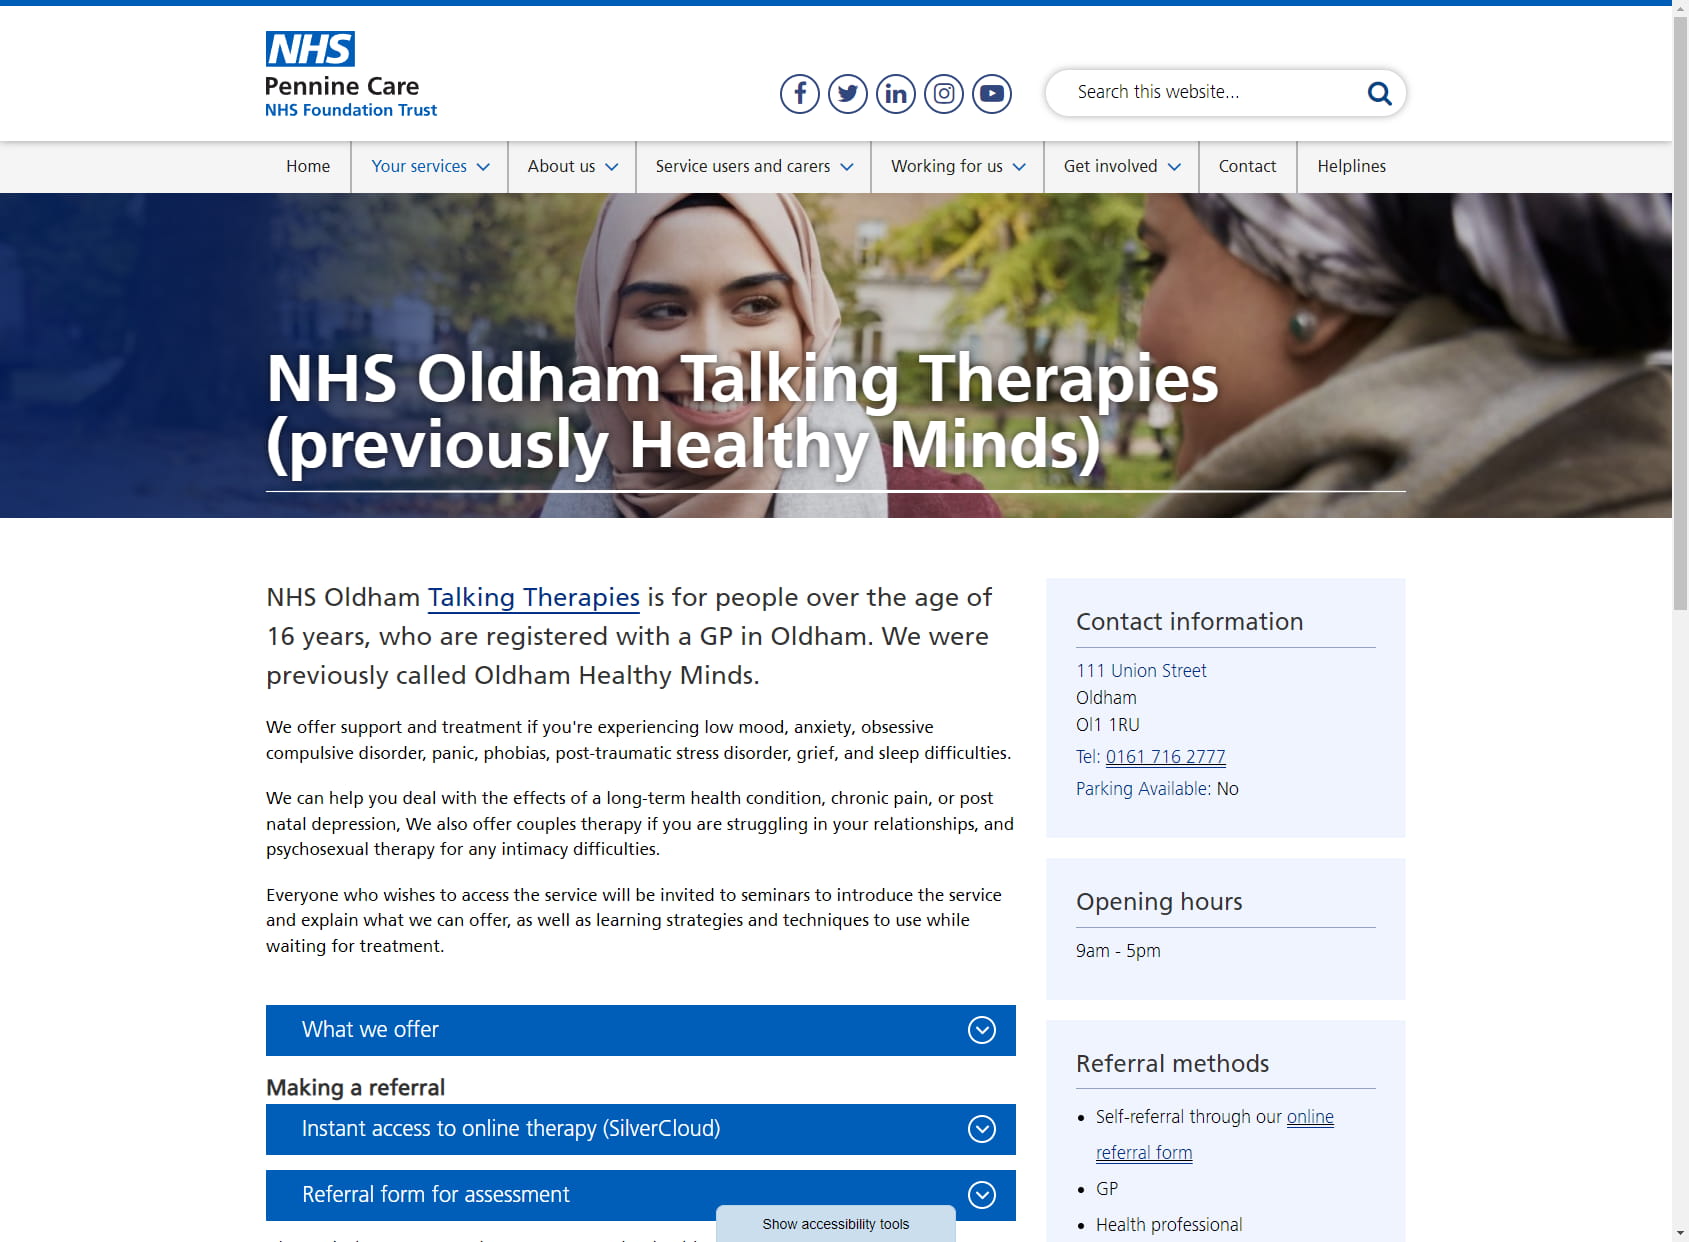 NHS Oldham Talking Therapies (formerly Oldham Healthy Minds)